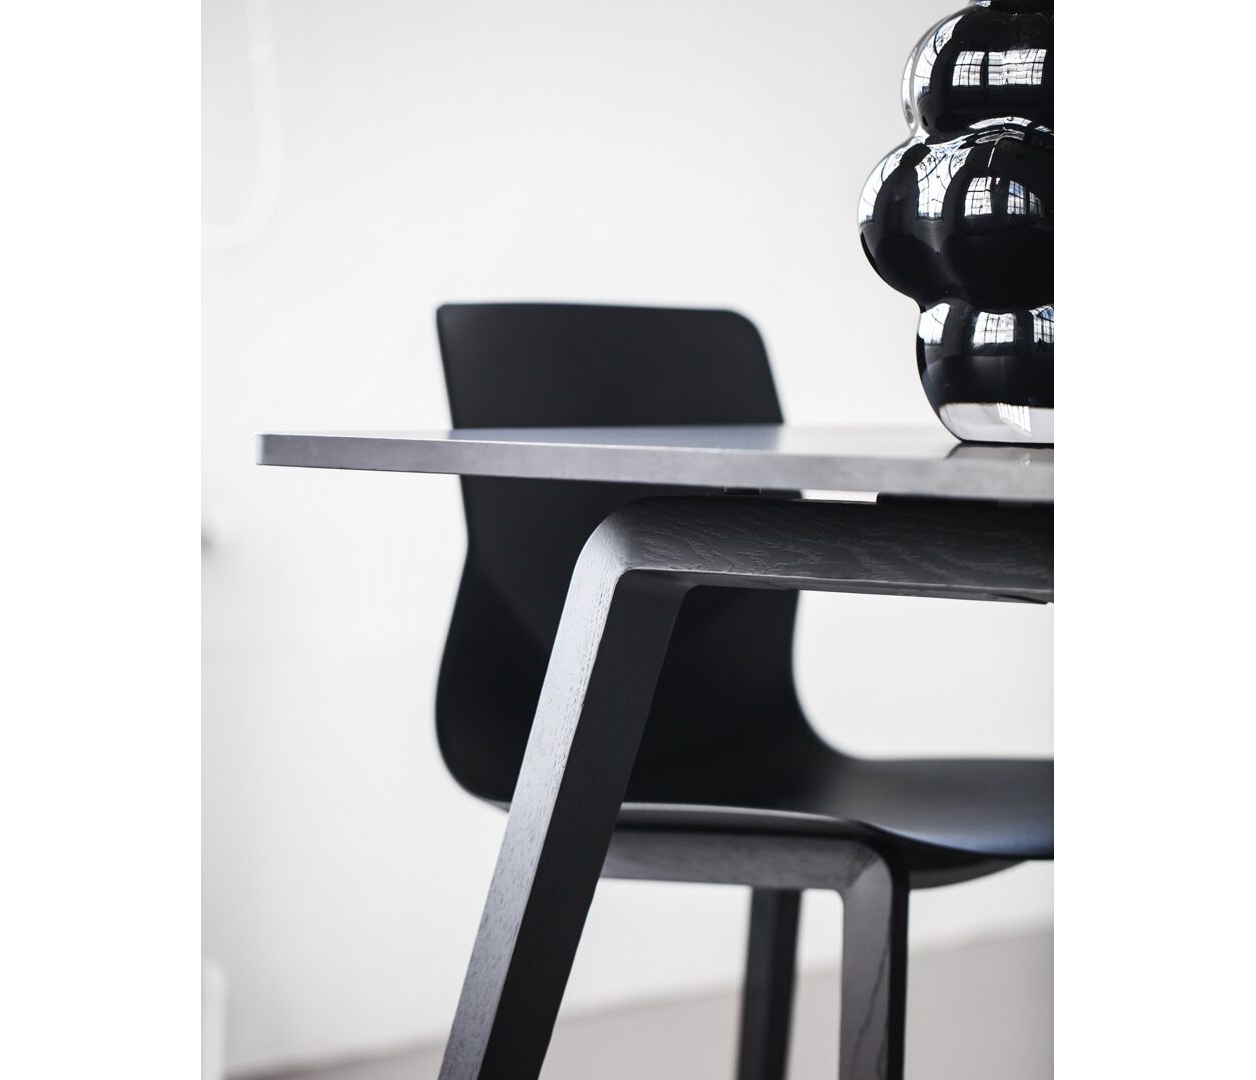 OCEE&FOUR – Chairs – FourSure 105 – Details Image 1 Large 2